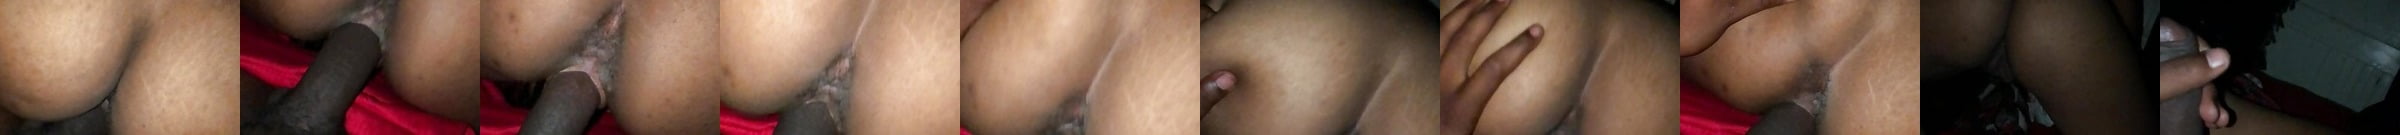 Featured Big Ass Pov Reverse Cowgirl And Slow Motion Booty